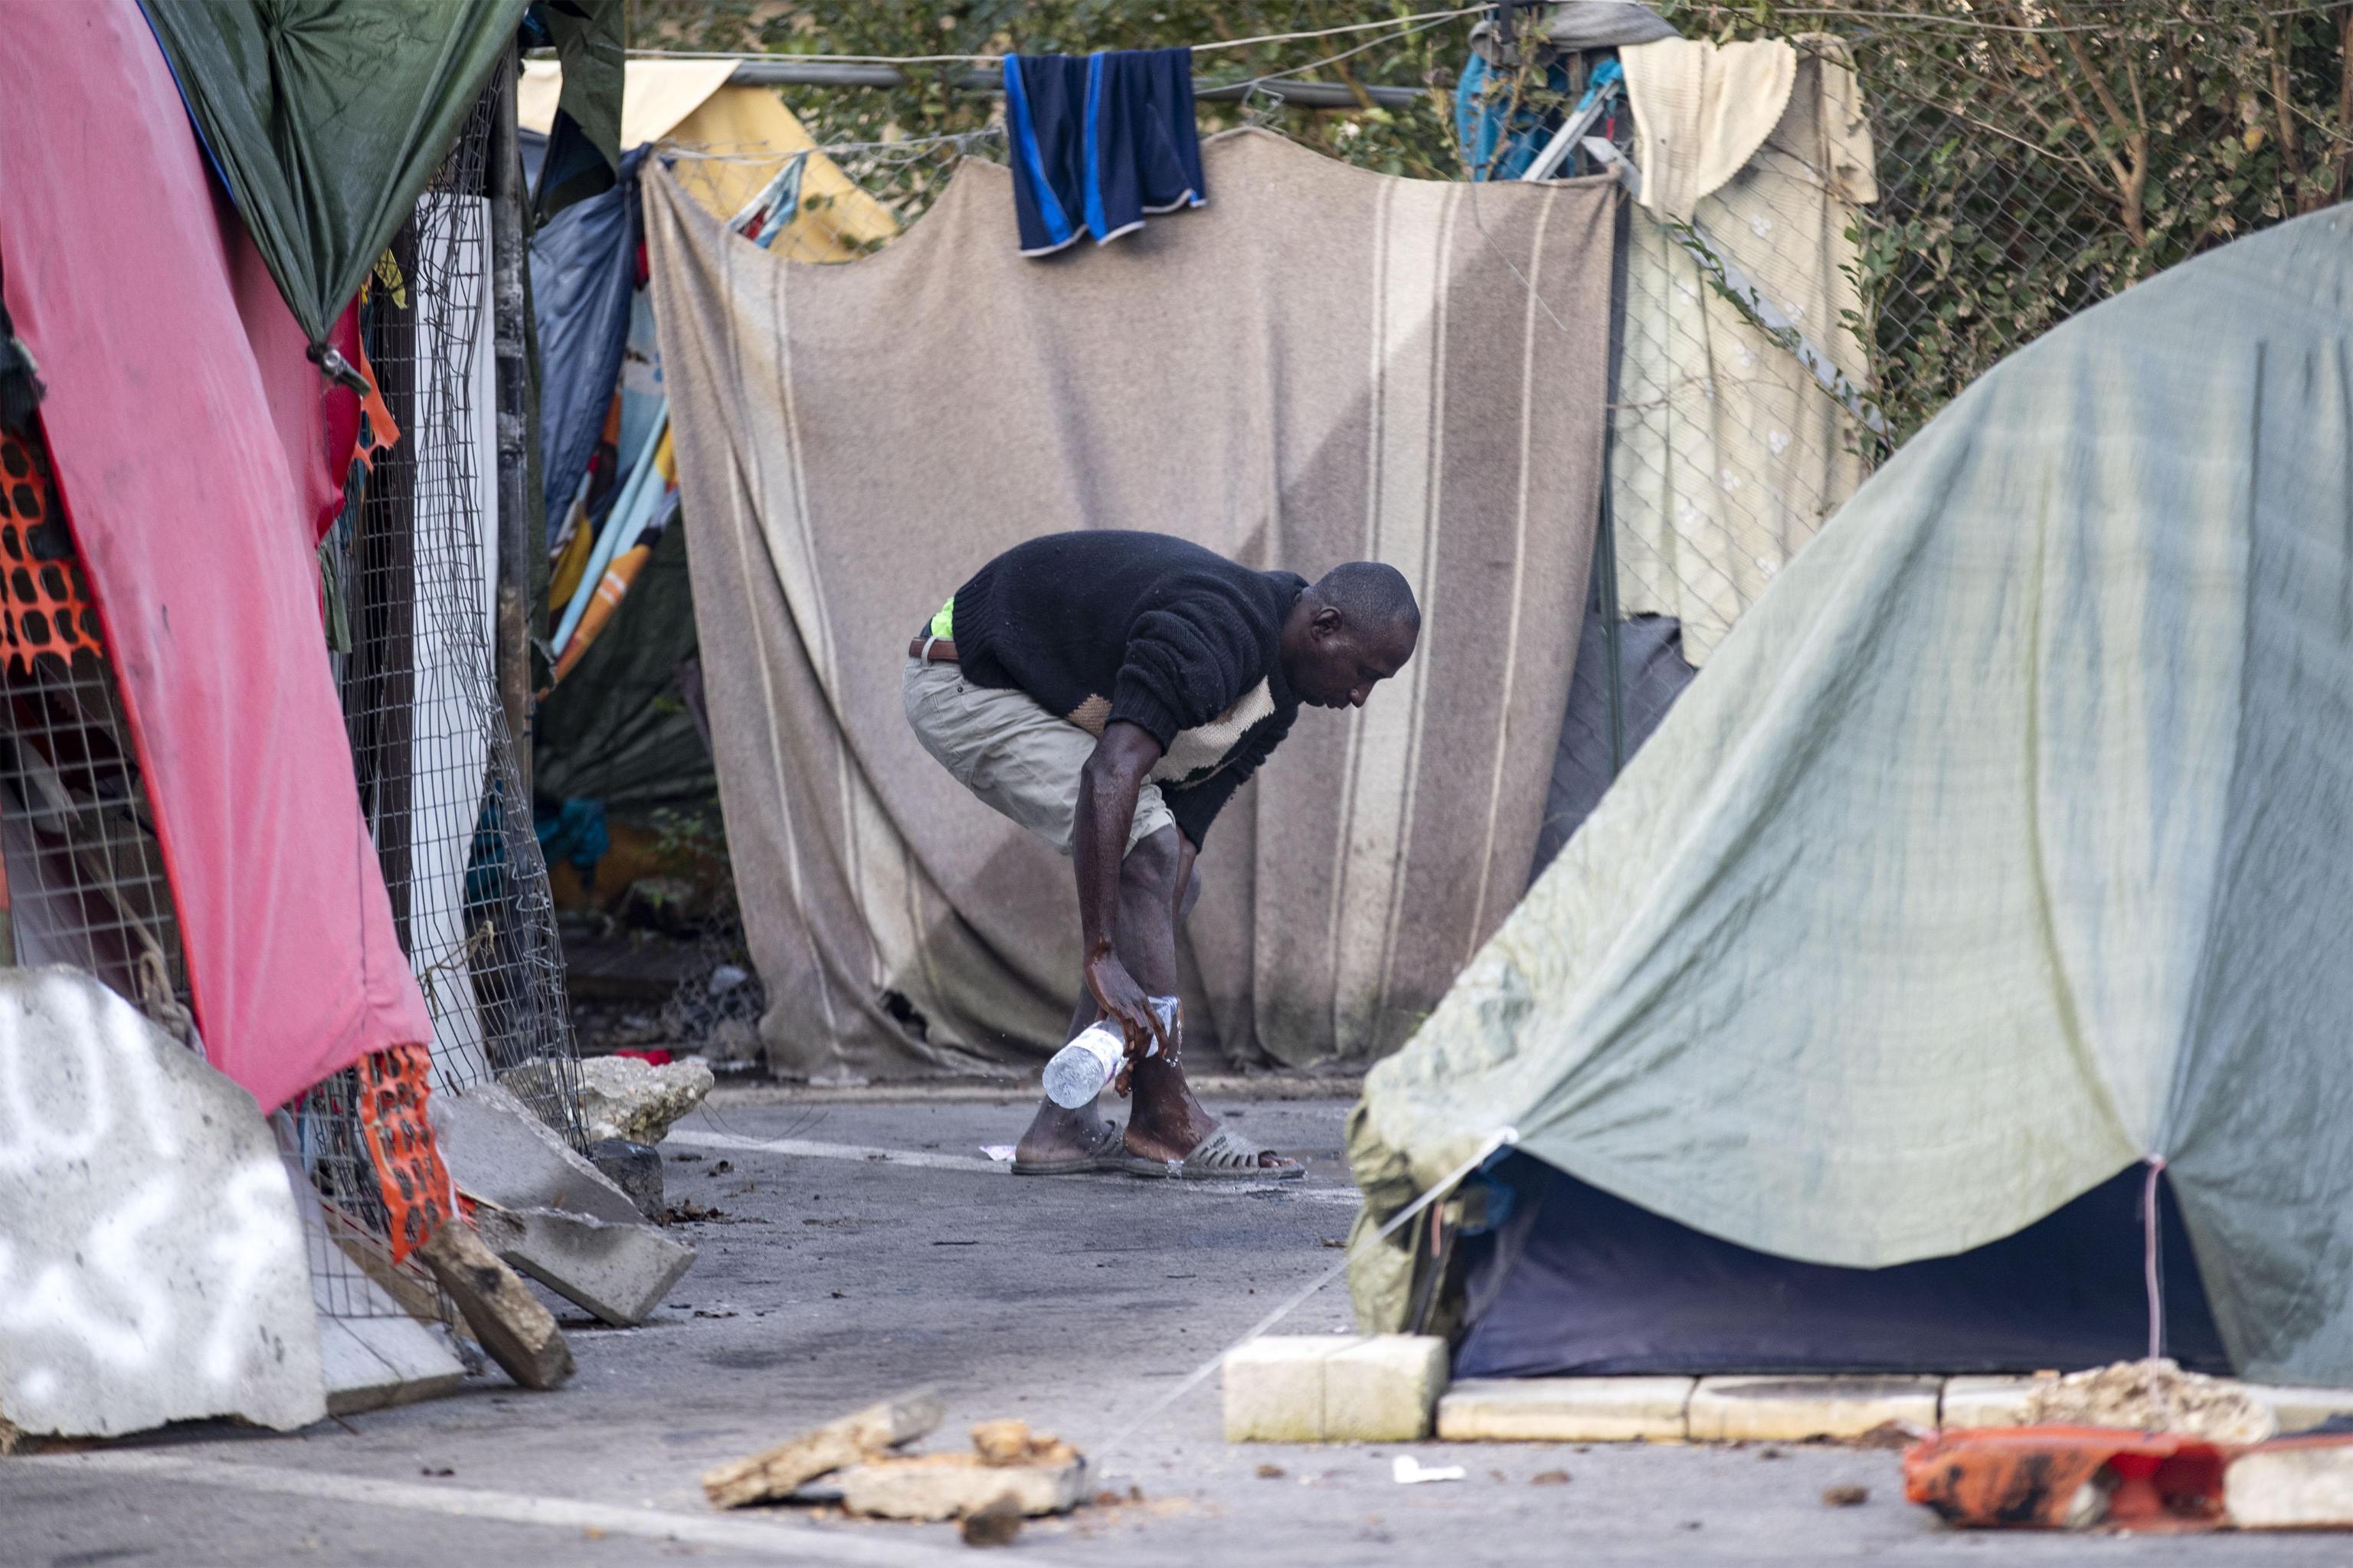 A camp run by volunteers providing food and shelter to migrants near to Rome's Tiburtina railway station was cleared by the authorities on Tuesday, 13 November 2018. Around 200 migrants were in the Baobab Experience camp before the eviction. ANSA/MASSIMO PERCOSSI